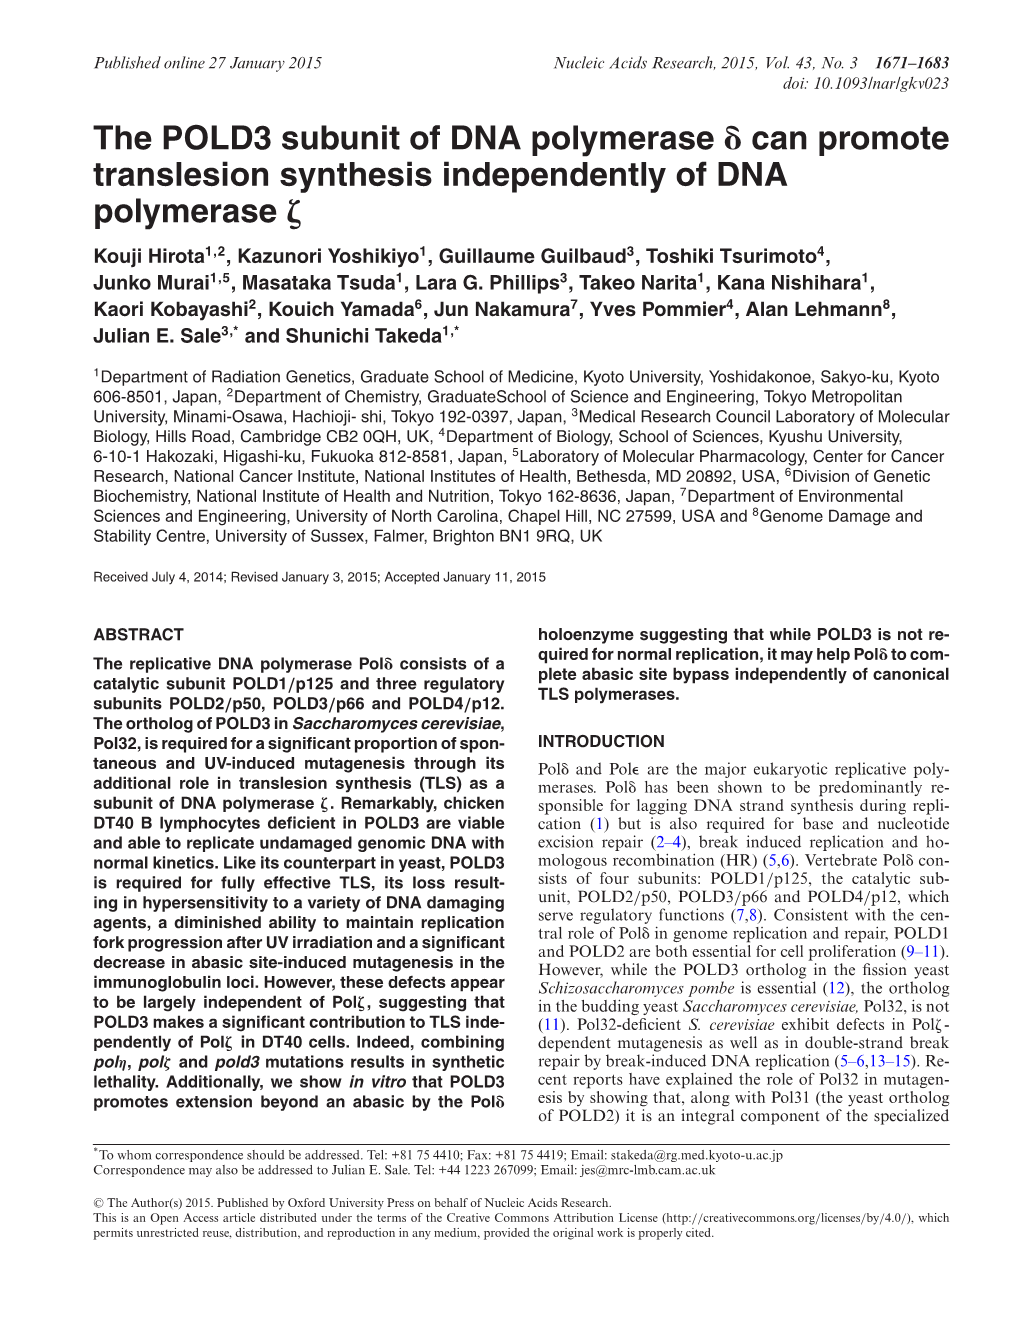 The POLD3 Subunit of DNA Polymerase Can Promote Translesion Synthesis Independently of DNA Polymerase